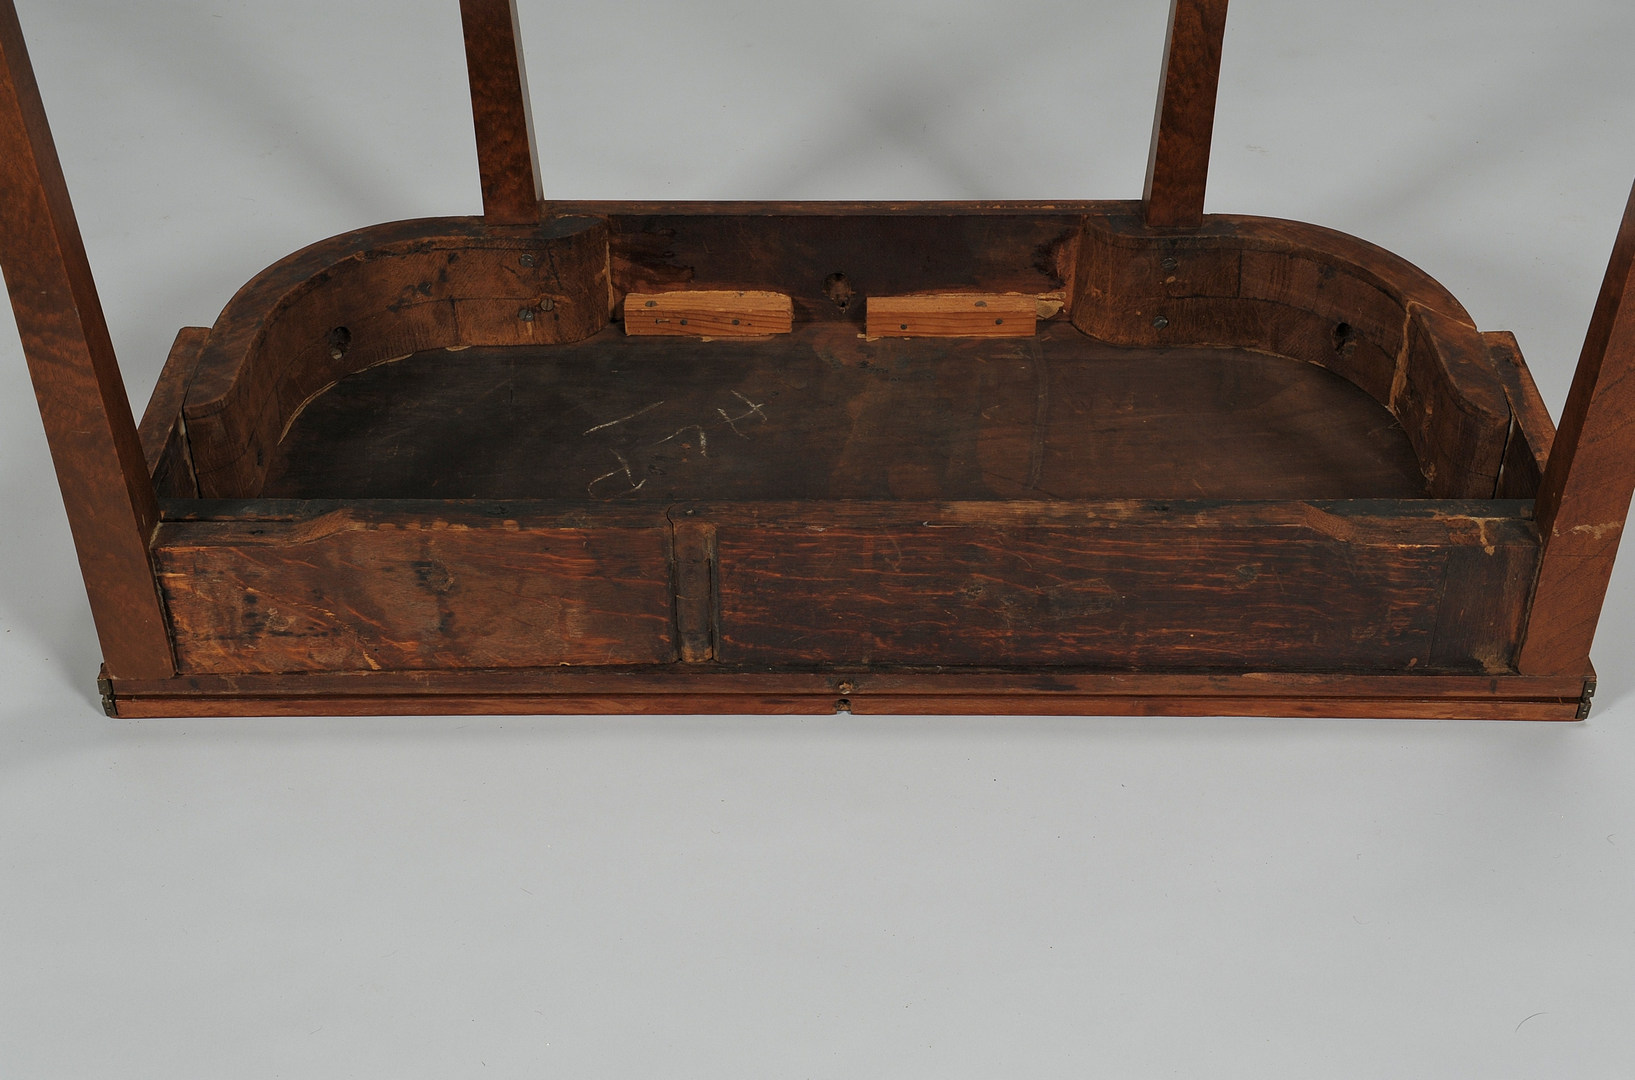 Lot 319: Federal Inlaid Card Table, Possibly Baltimore